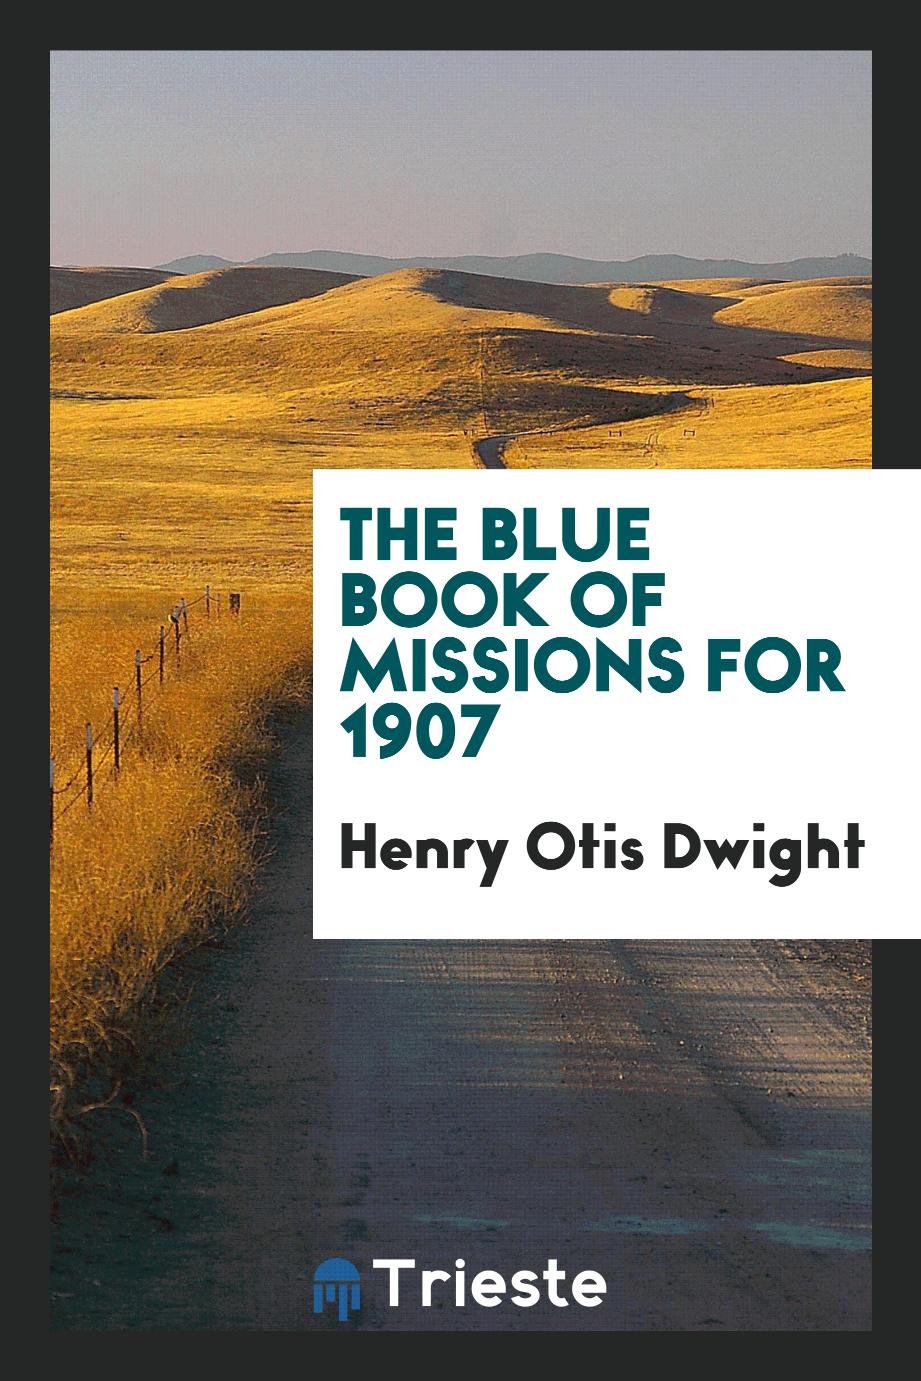 The blue book of missions for 1907